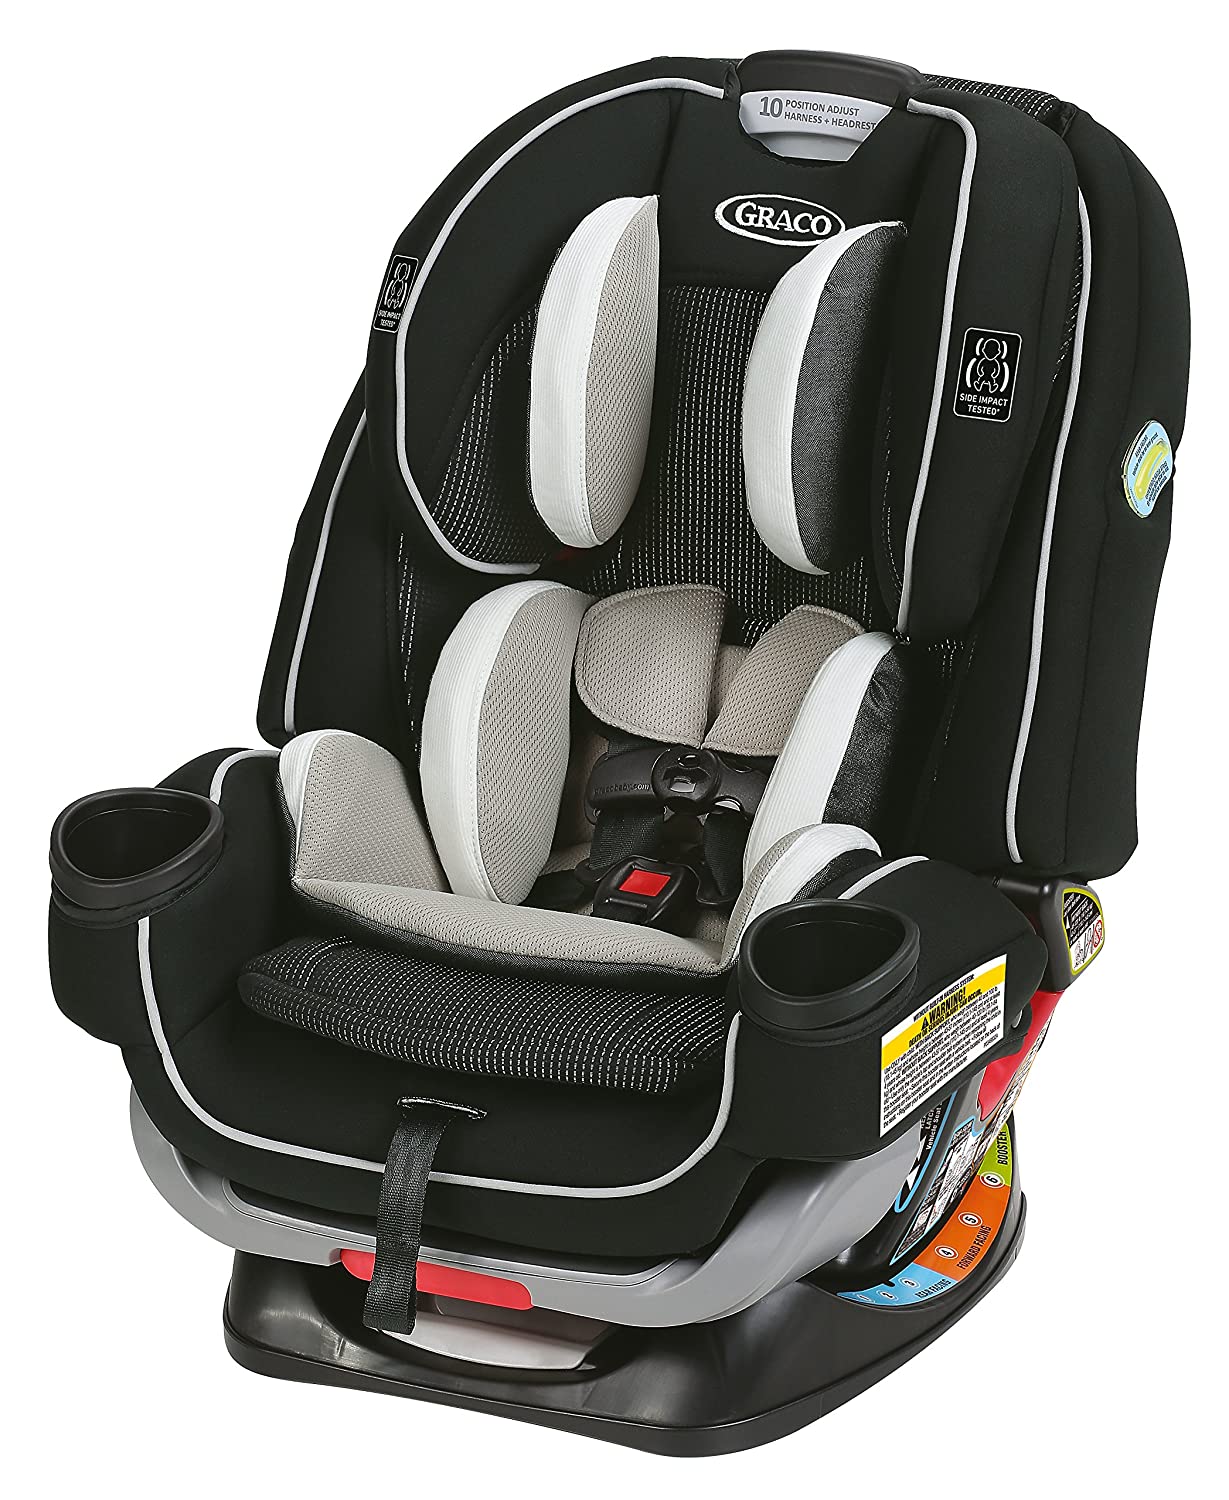 Best Convertible Car Seat 2021 - Reviews & Safety Ratings